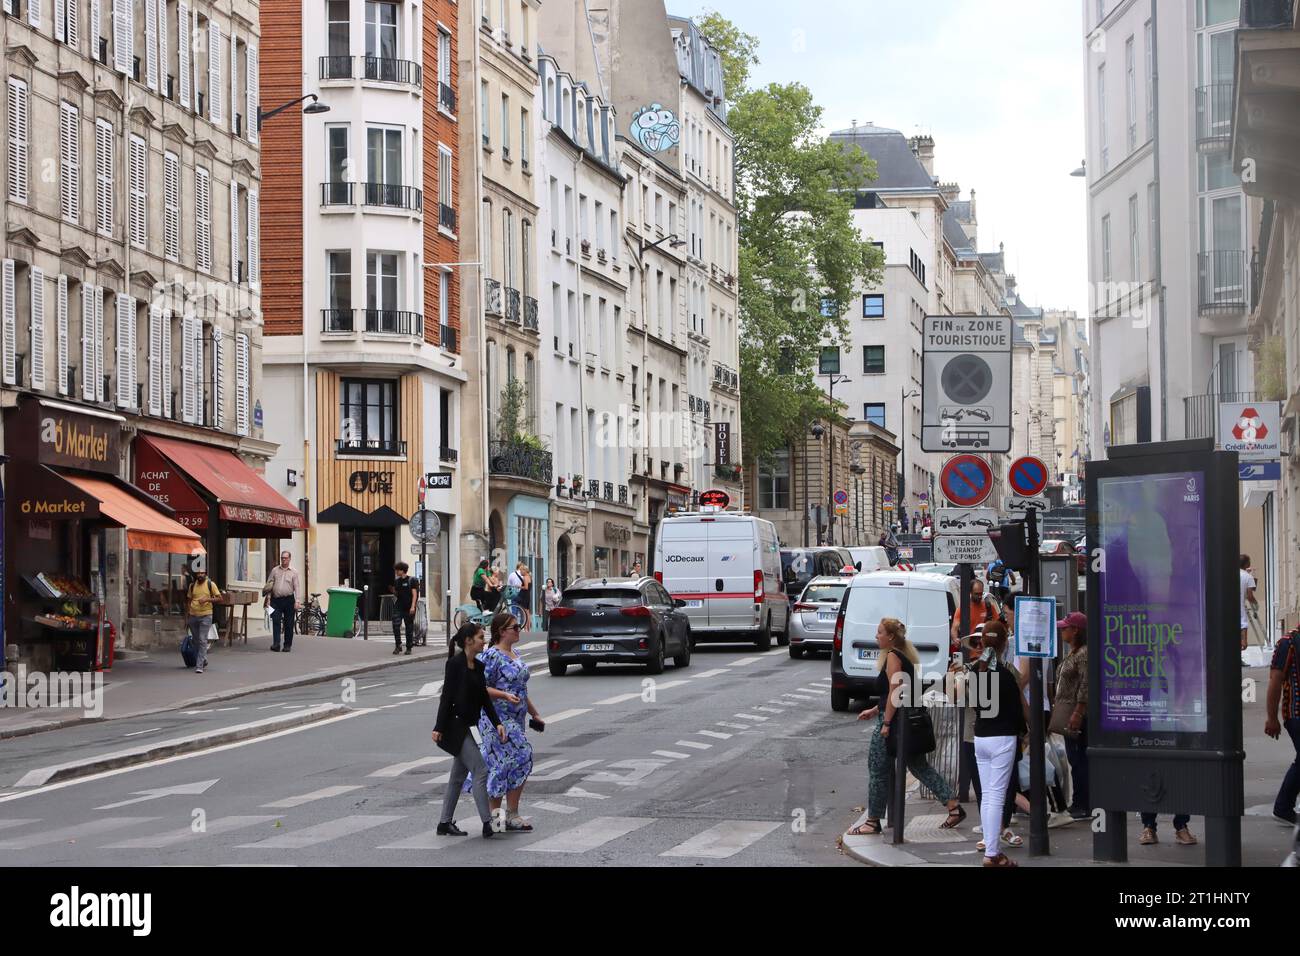 Streets, buildings and architecture of Paris, France Stock Photo